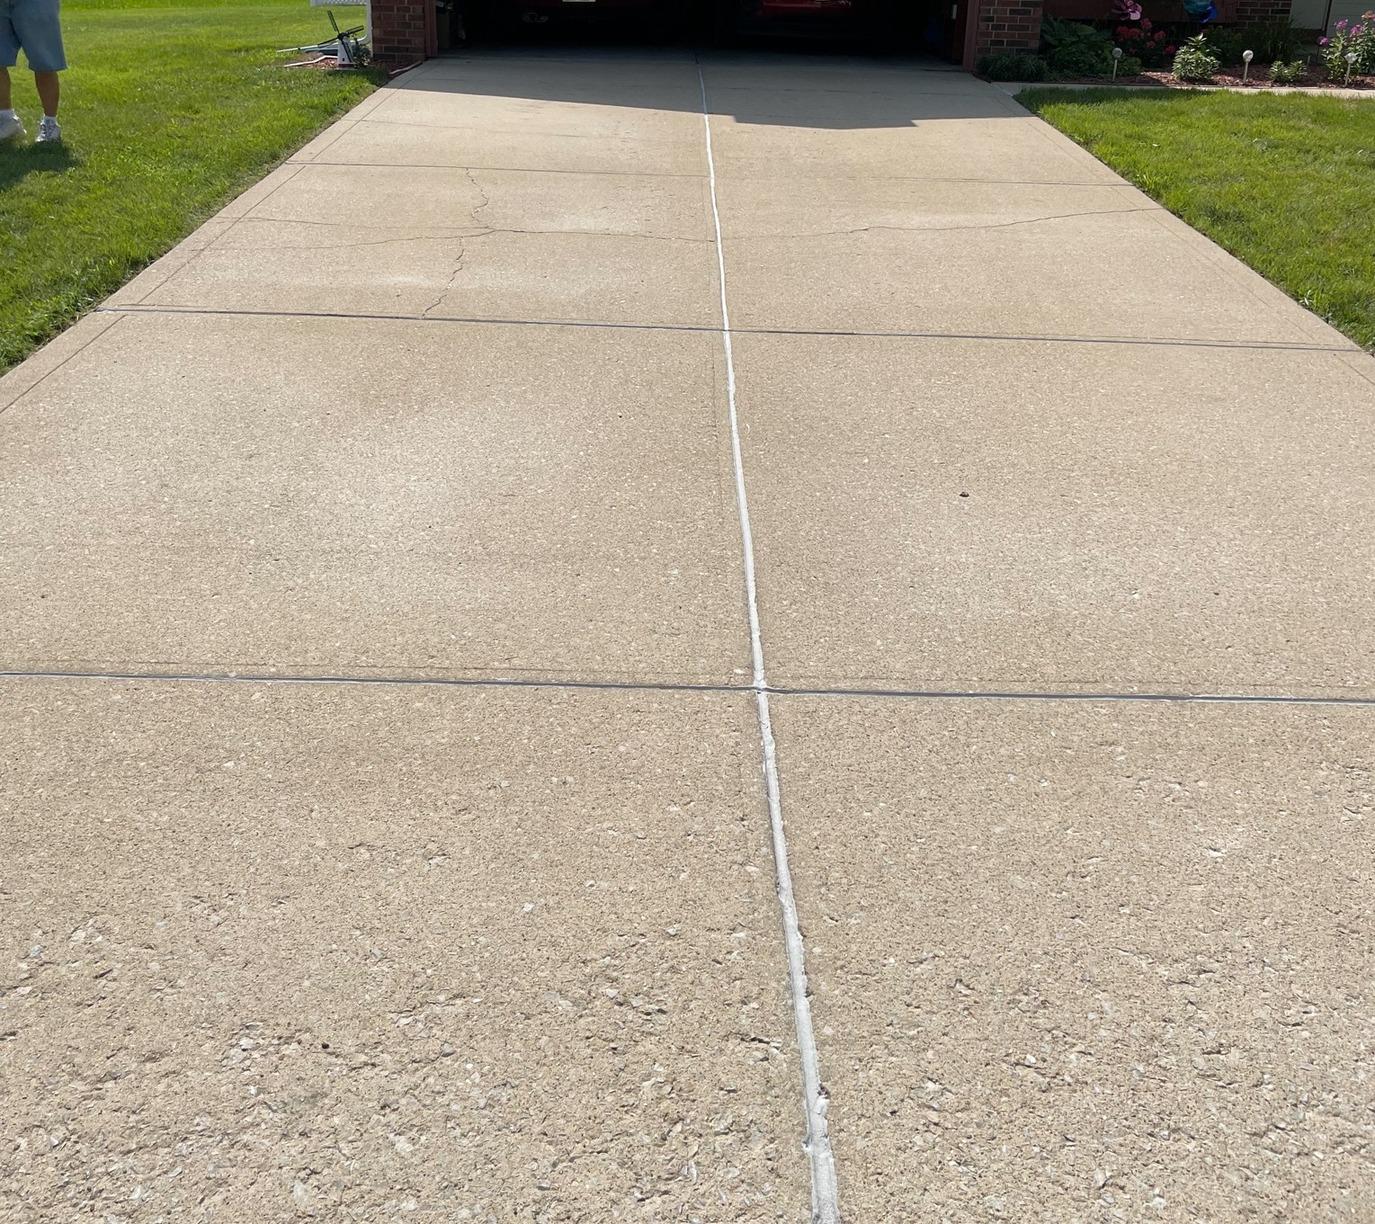 Driveway after power washing and sealing